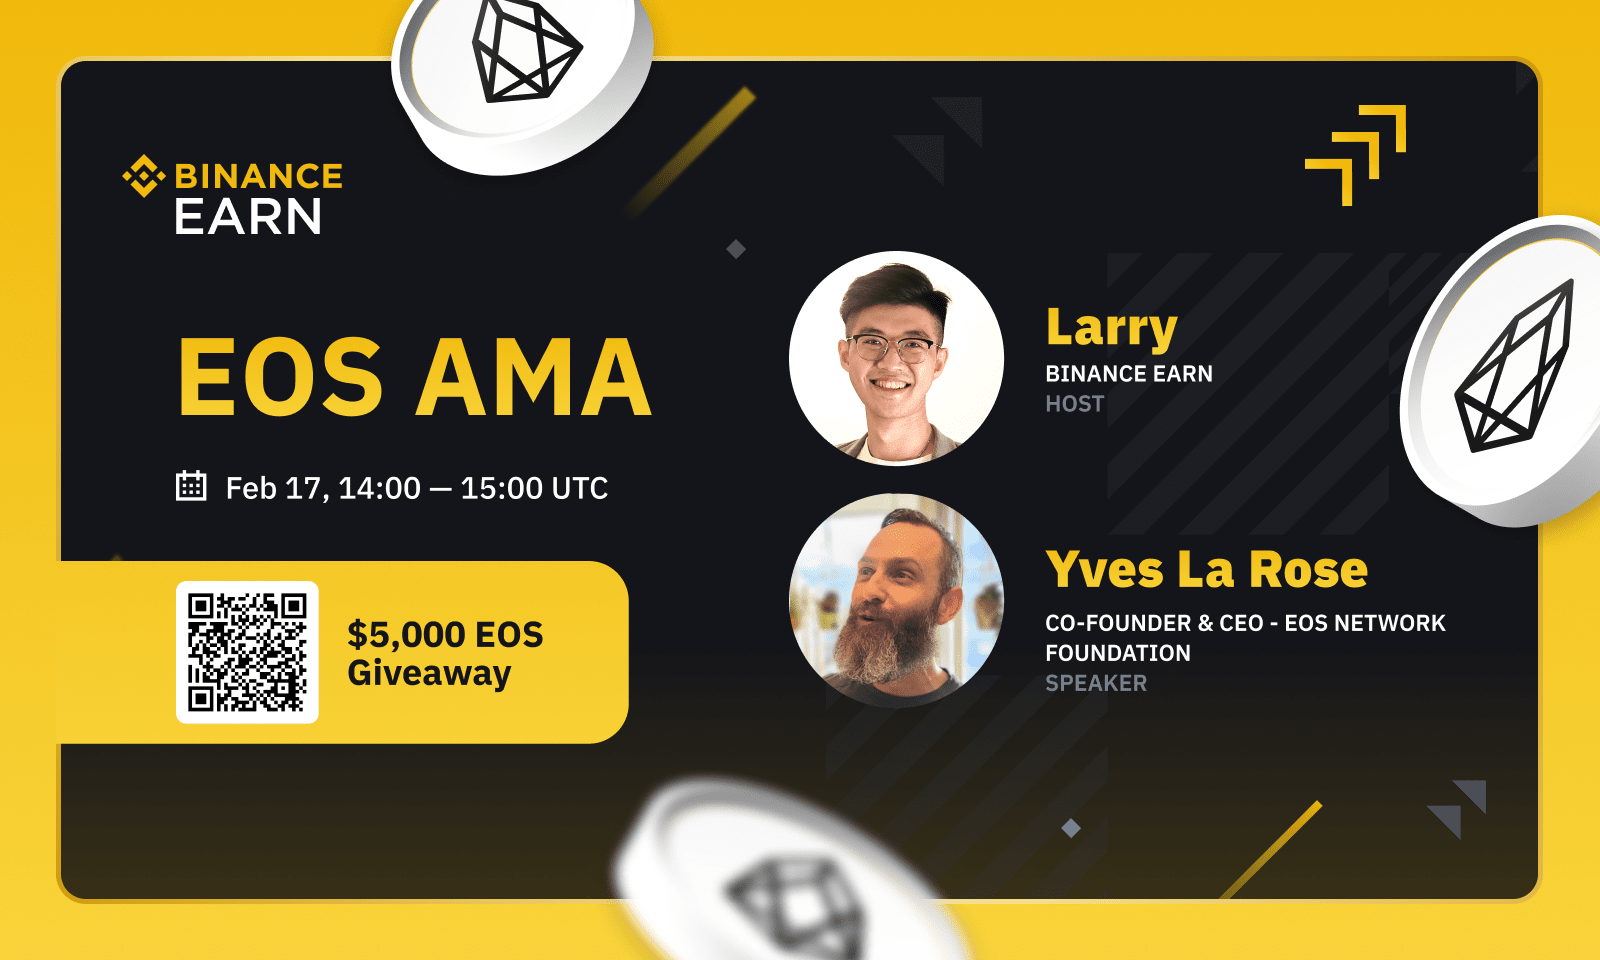 EOS AMA with Yves La Rose - Co-founder & CEO of EOS Network Foundation